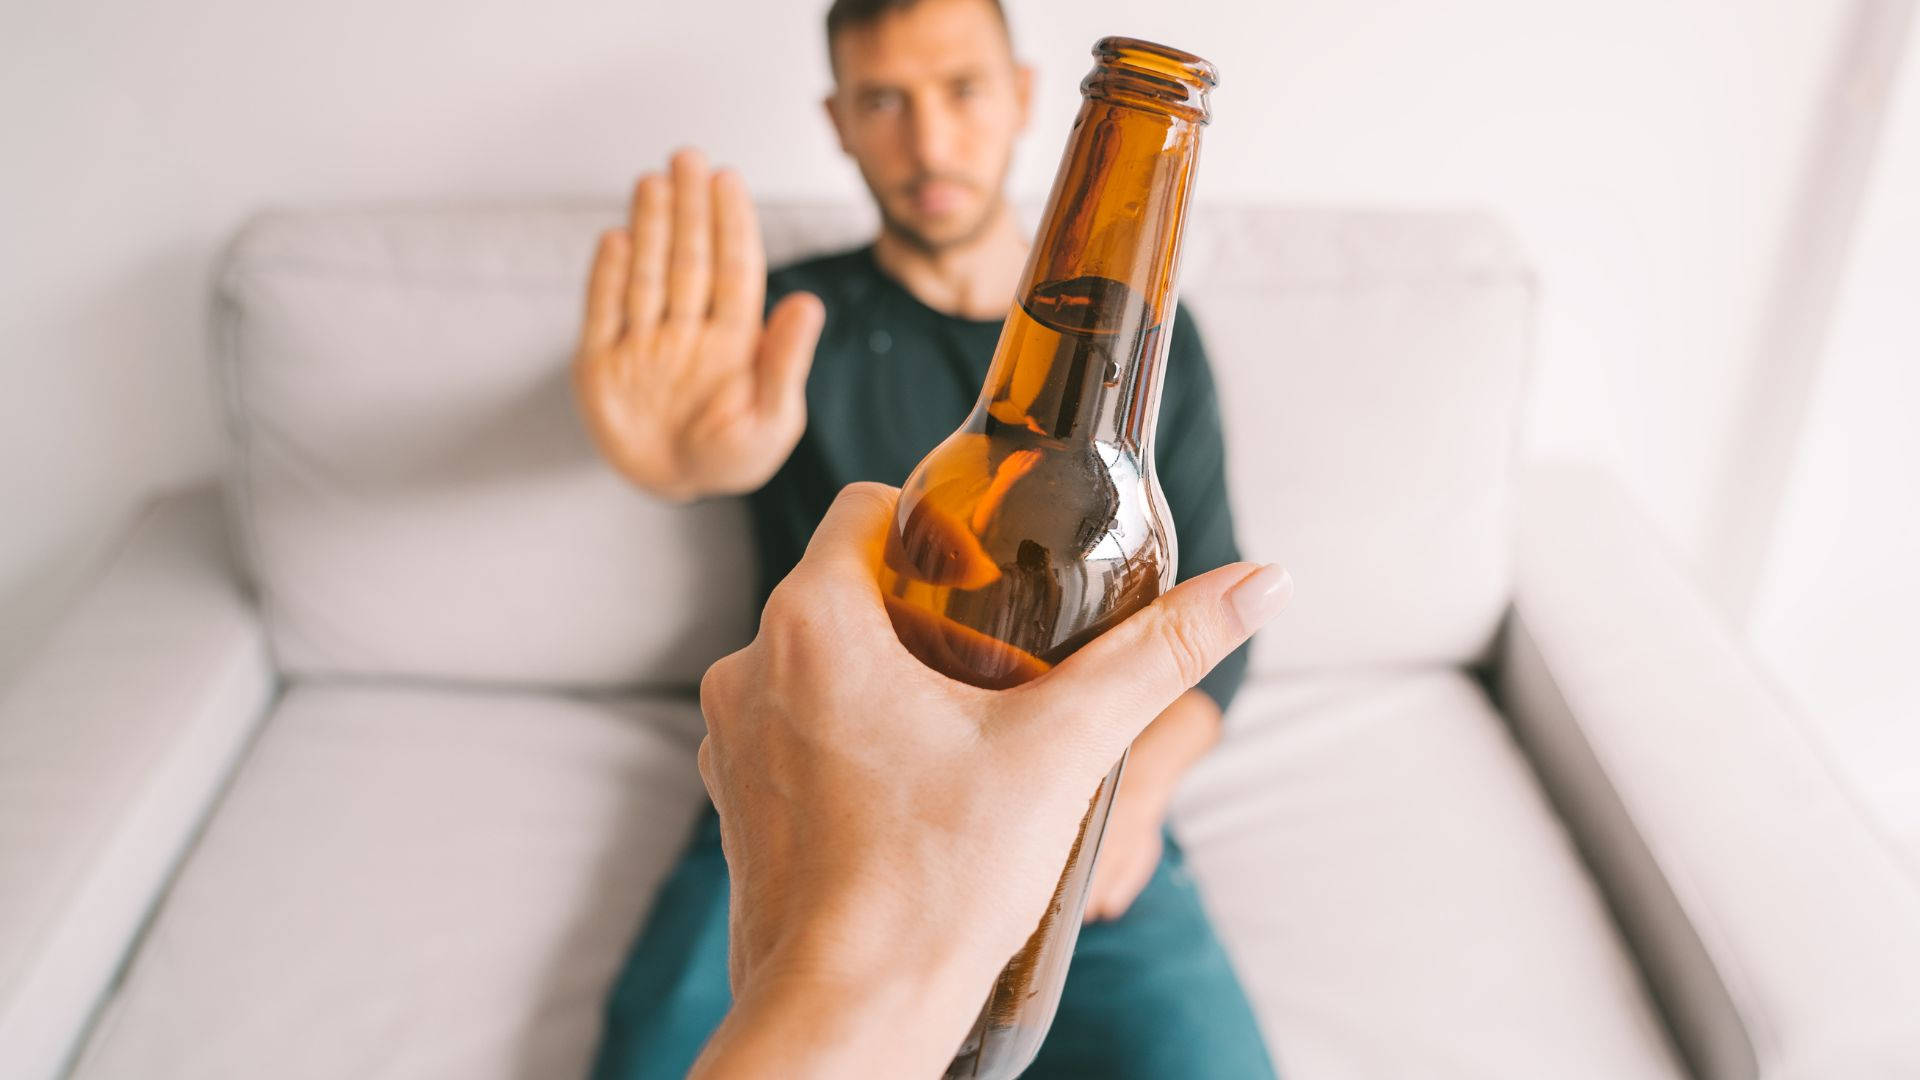 Man Rejecting A Bottle Of Alcohol Picture